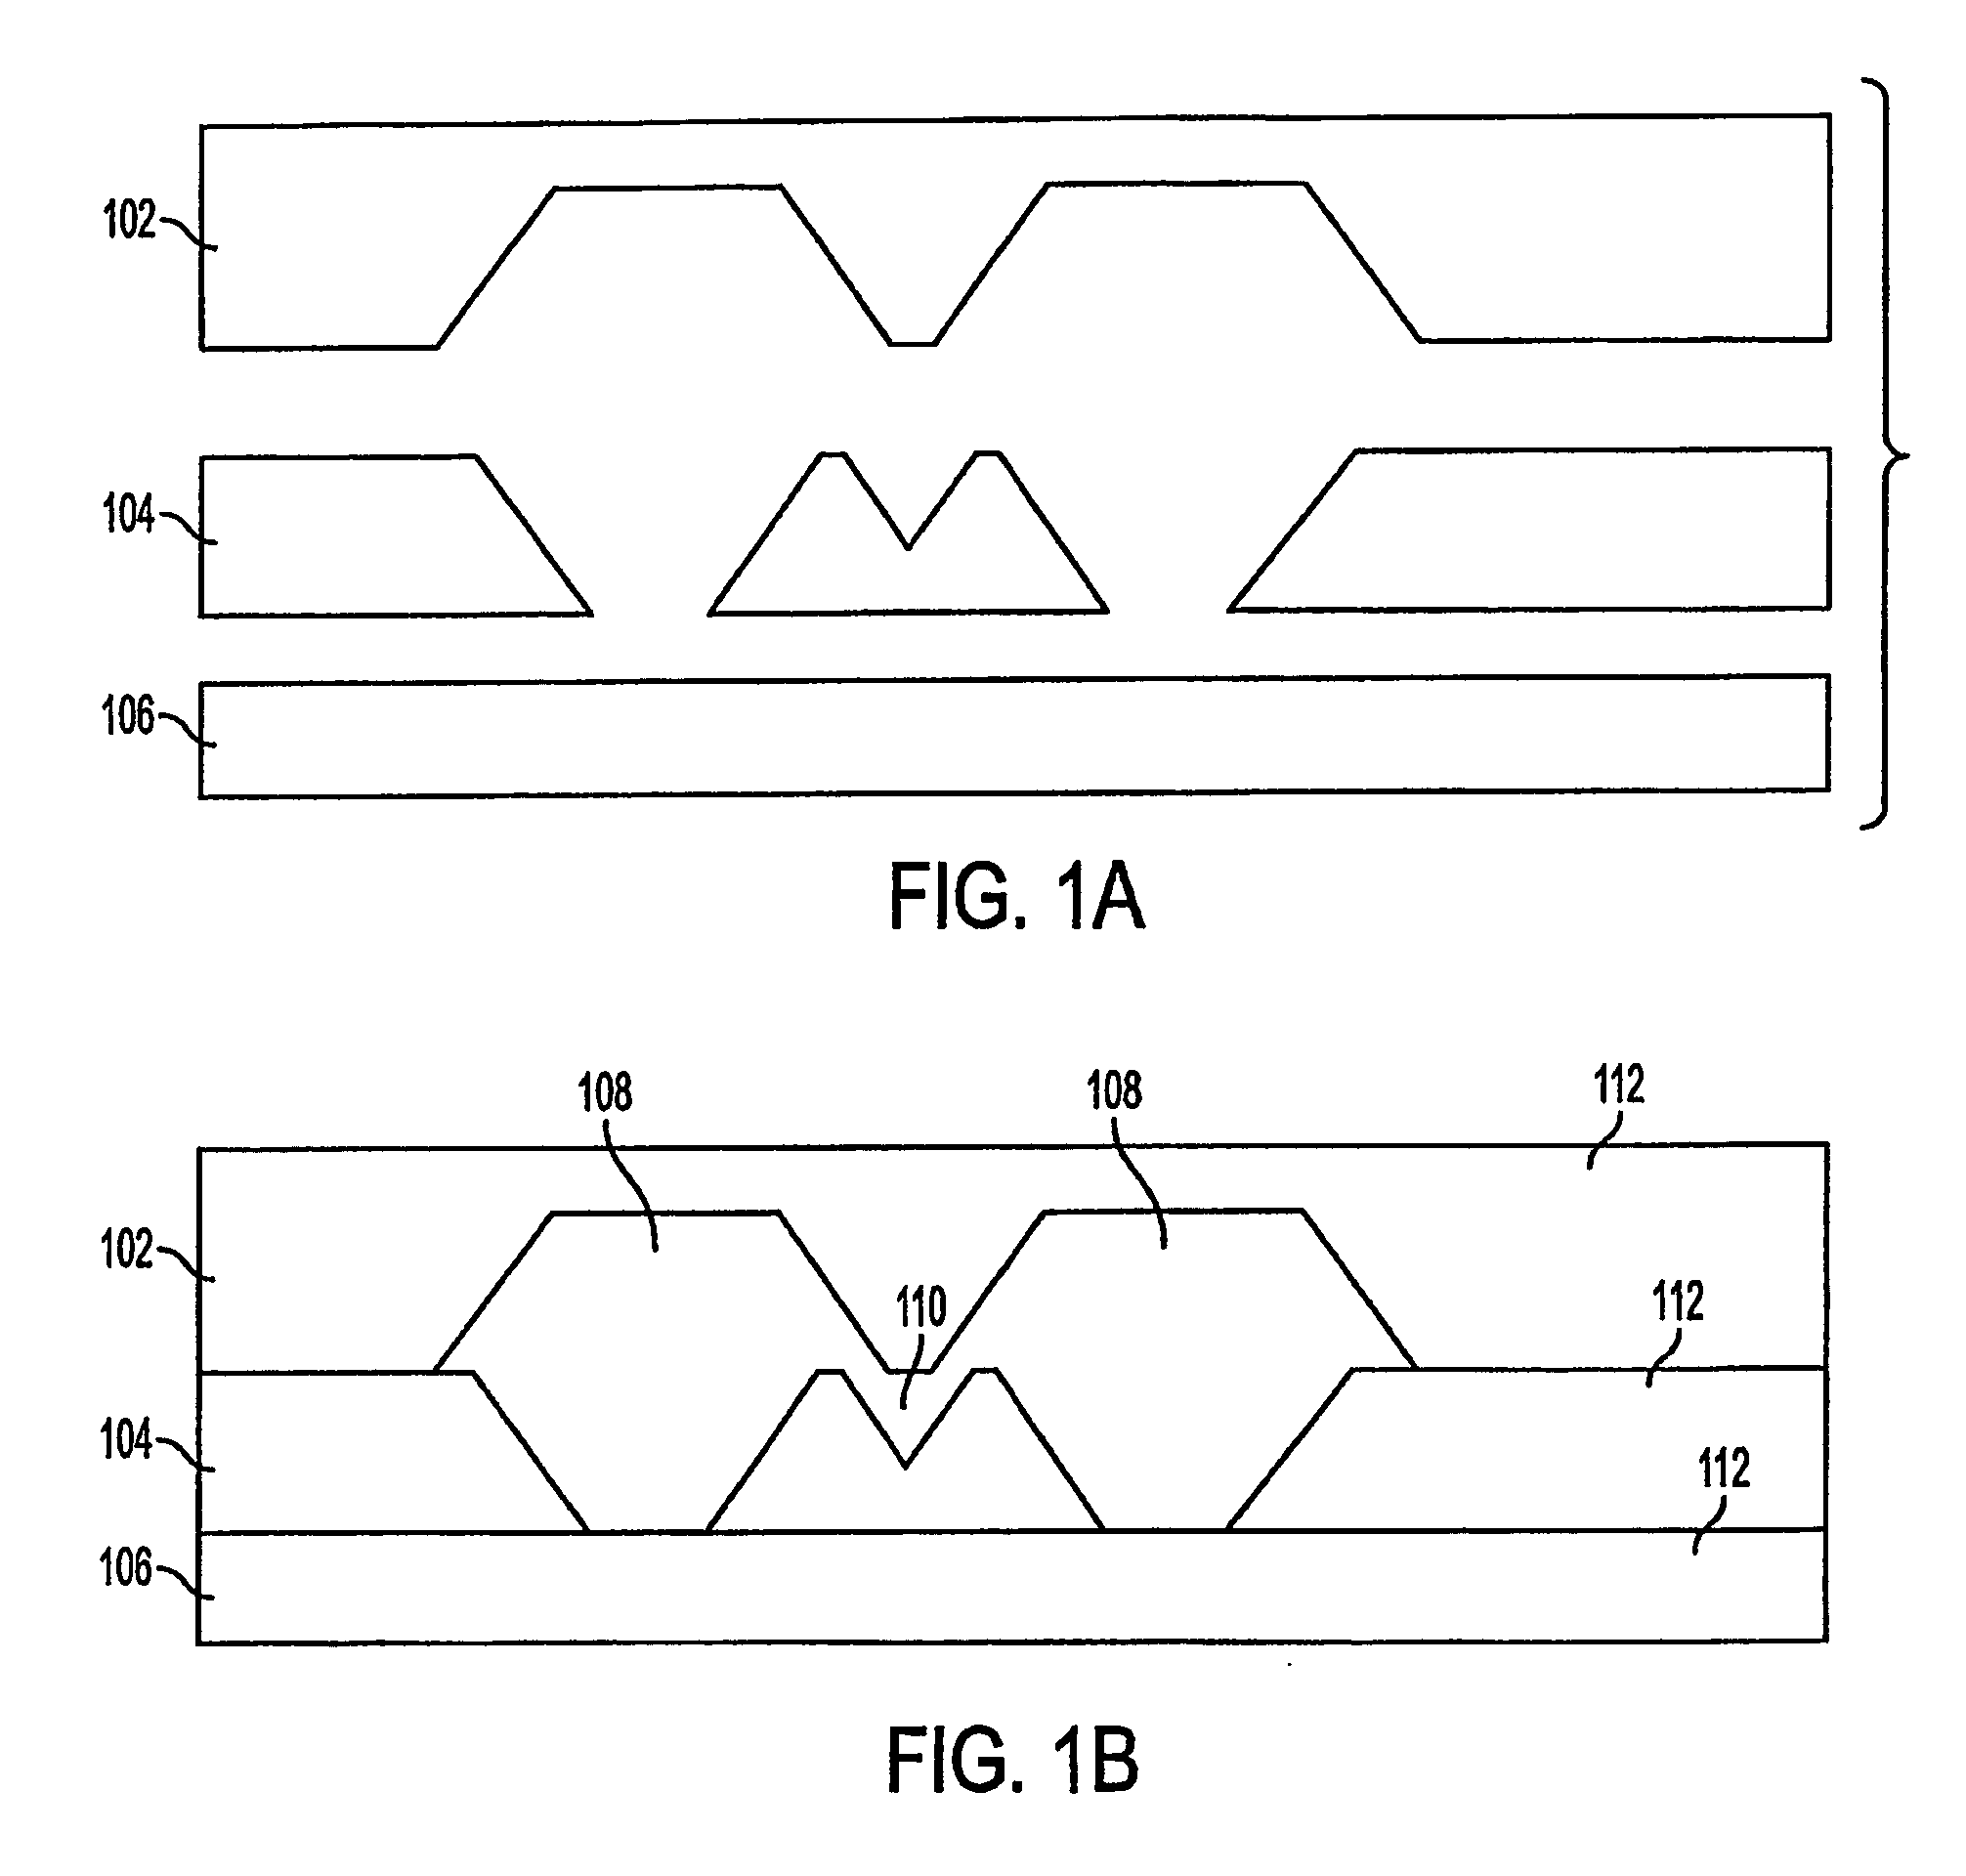 Coupled resonator filters formed by micromachining